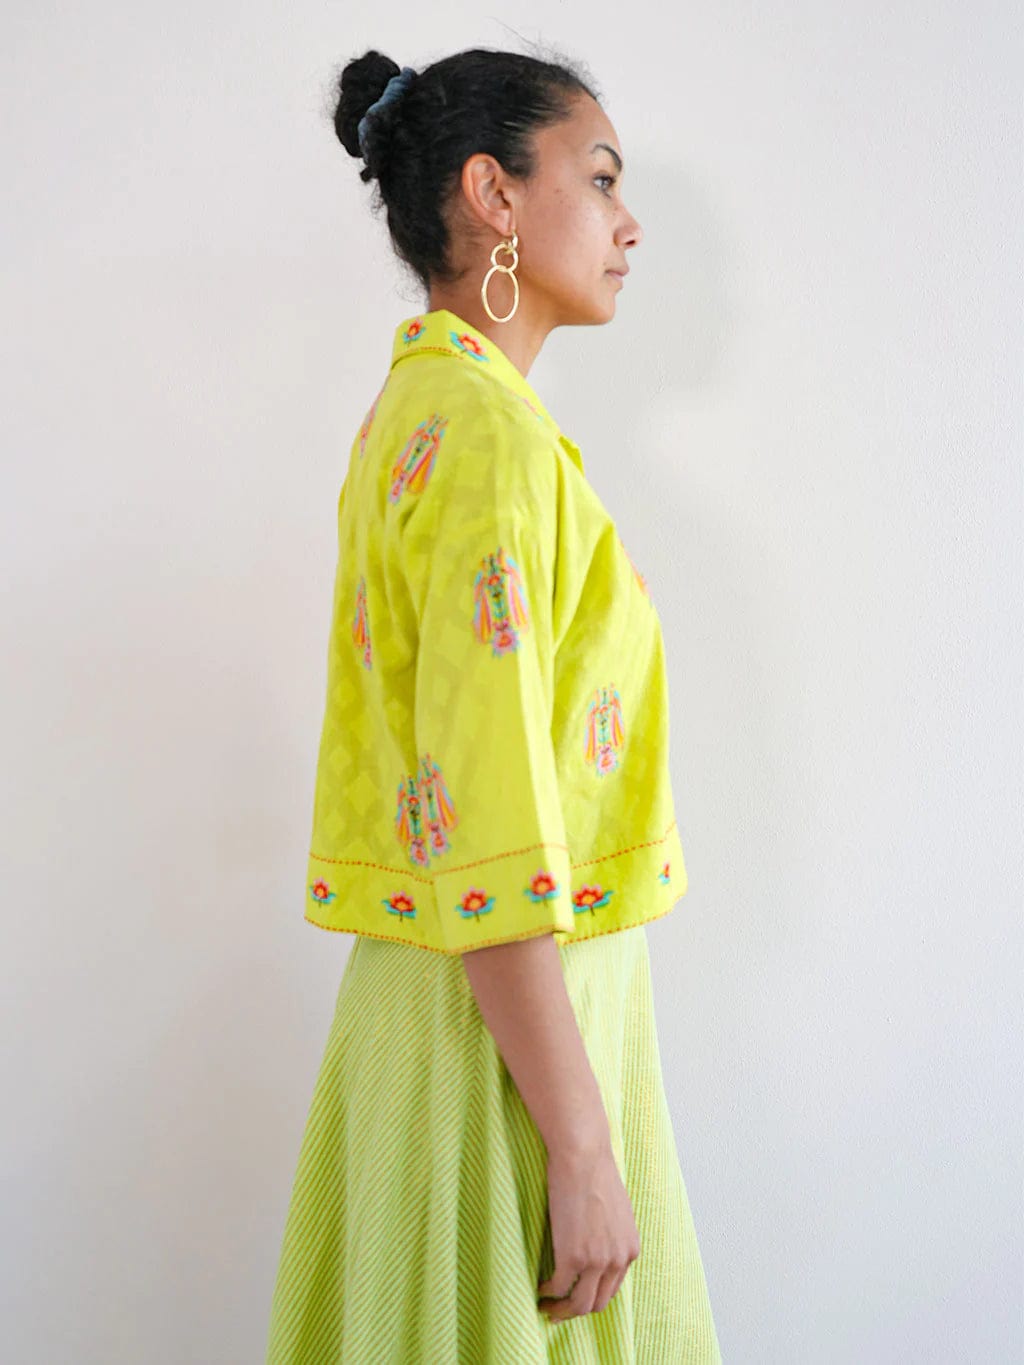 Nimo with Love Thyme Blouse Parrot Embroidery on Lime Jacquard